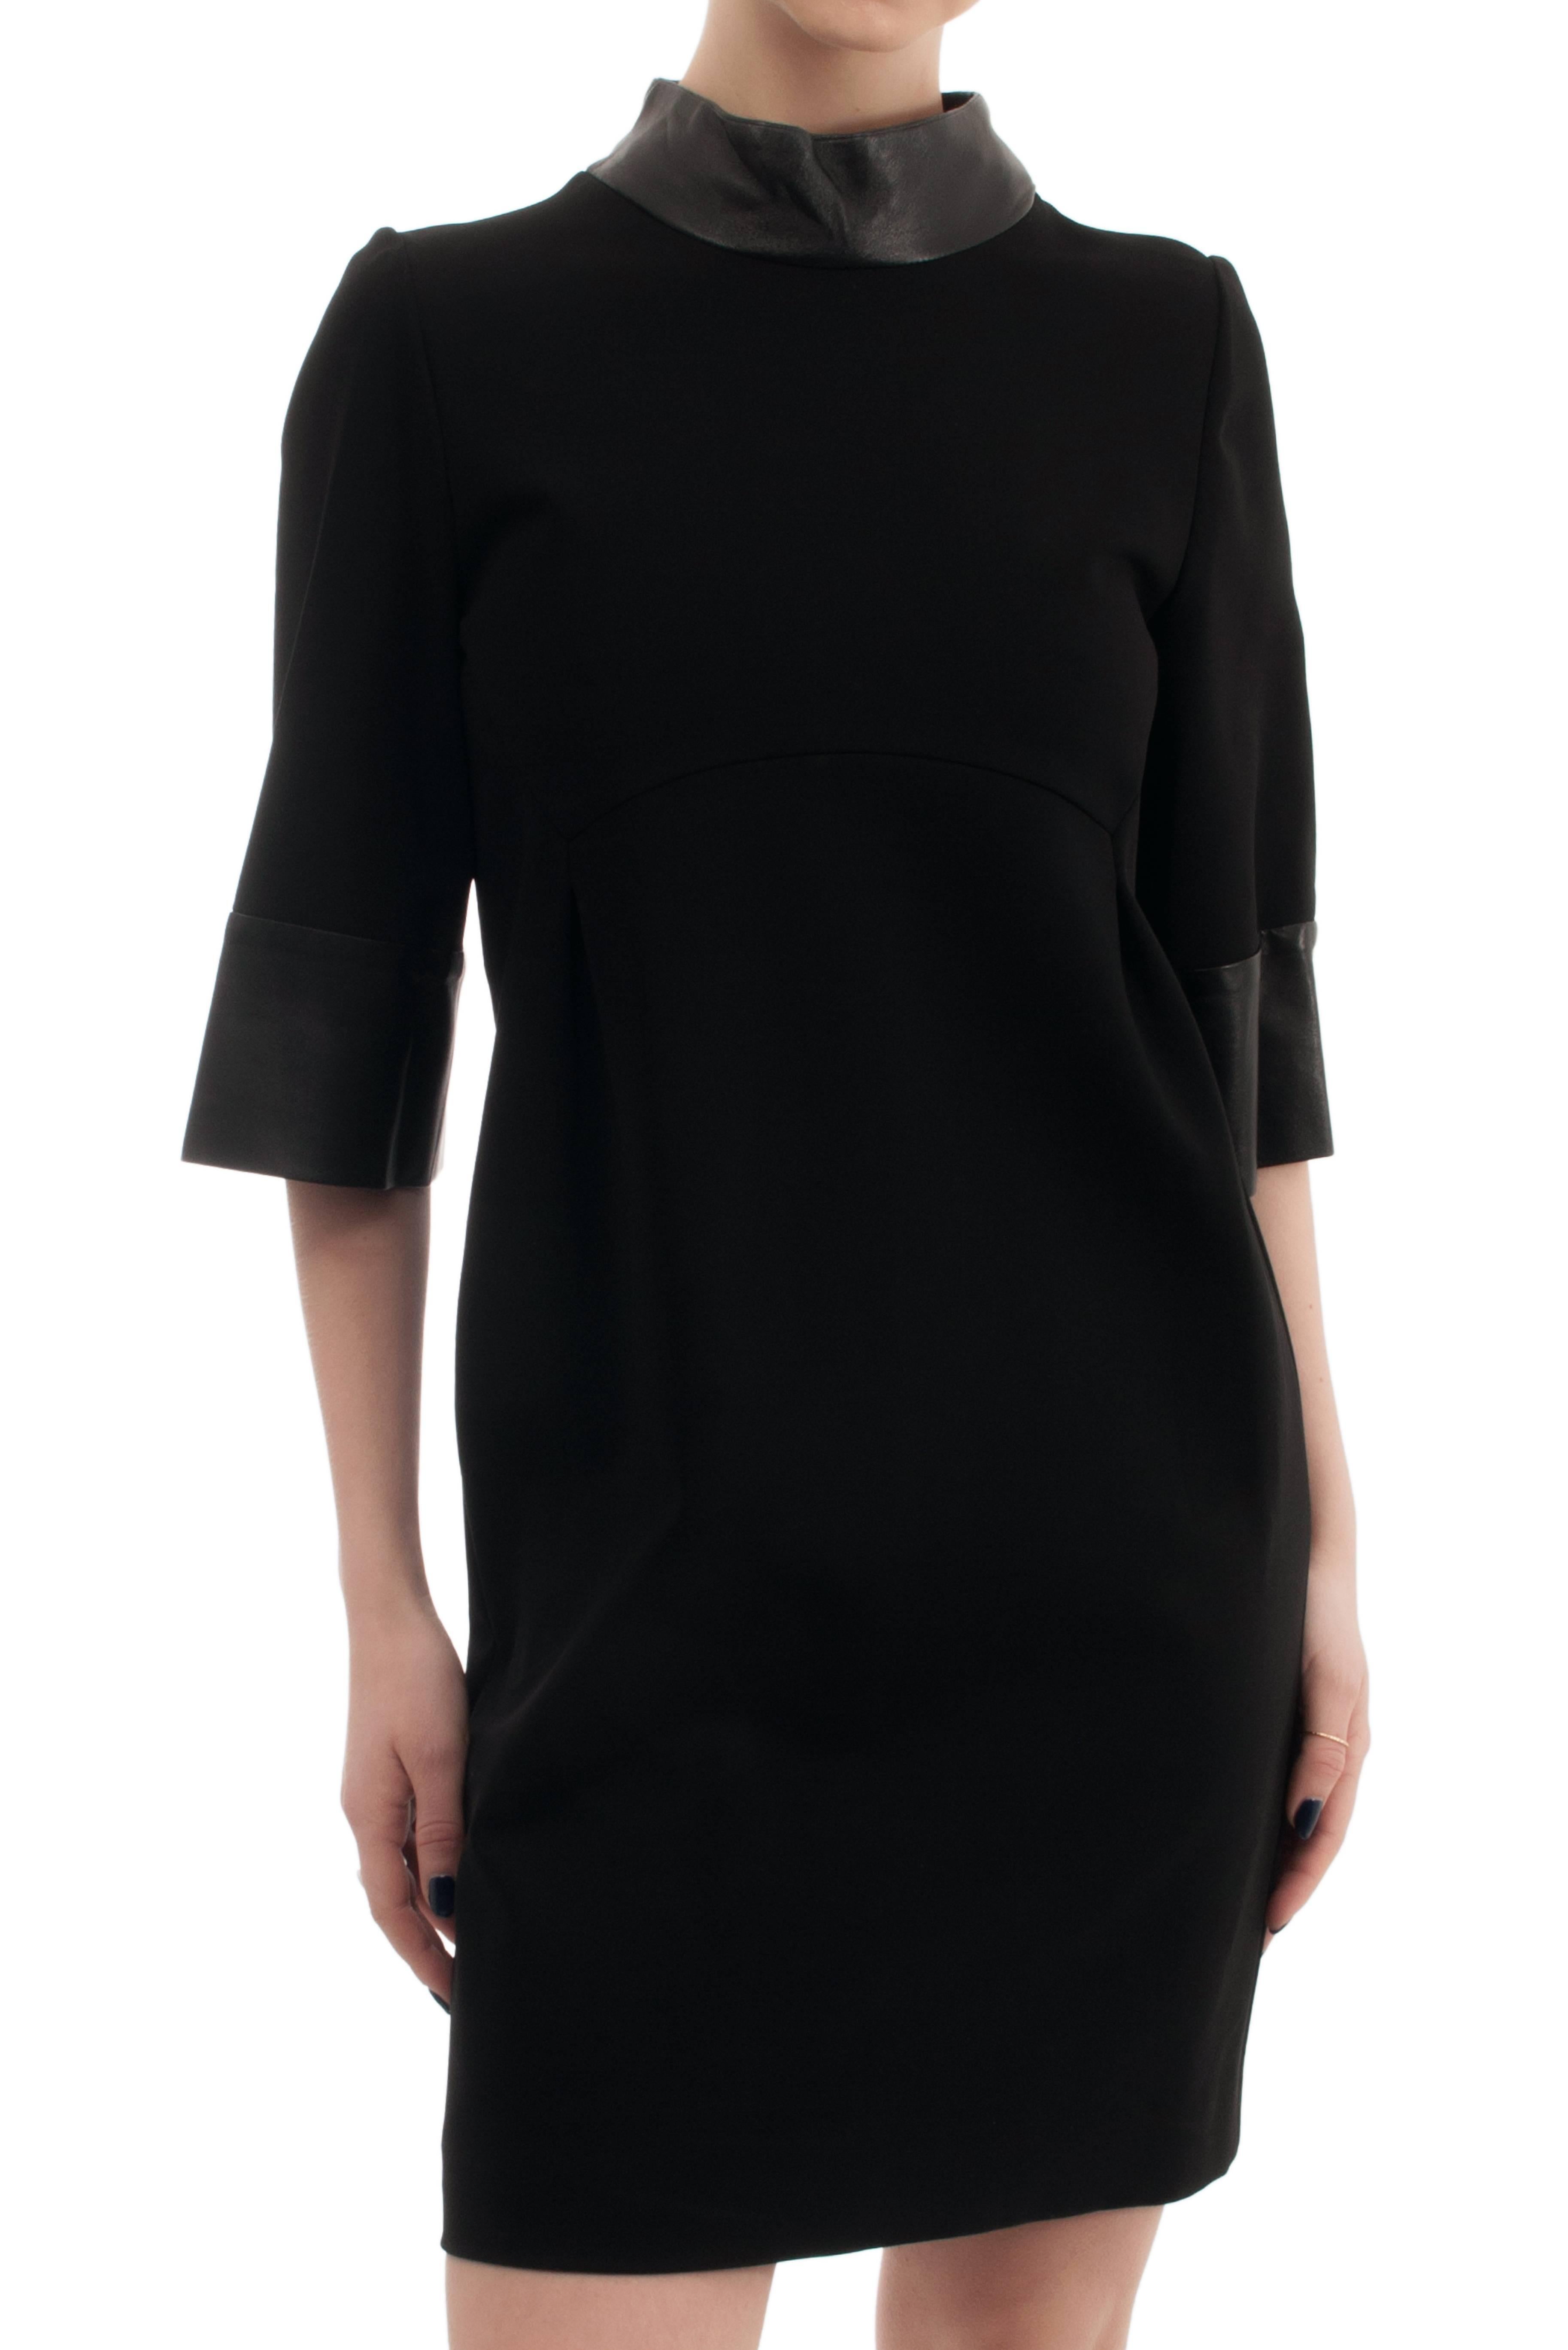 Gucci Black Stretch Crepe Dress with Leather Cuffs and Collar  For Sale 2